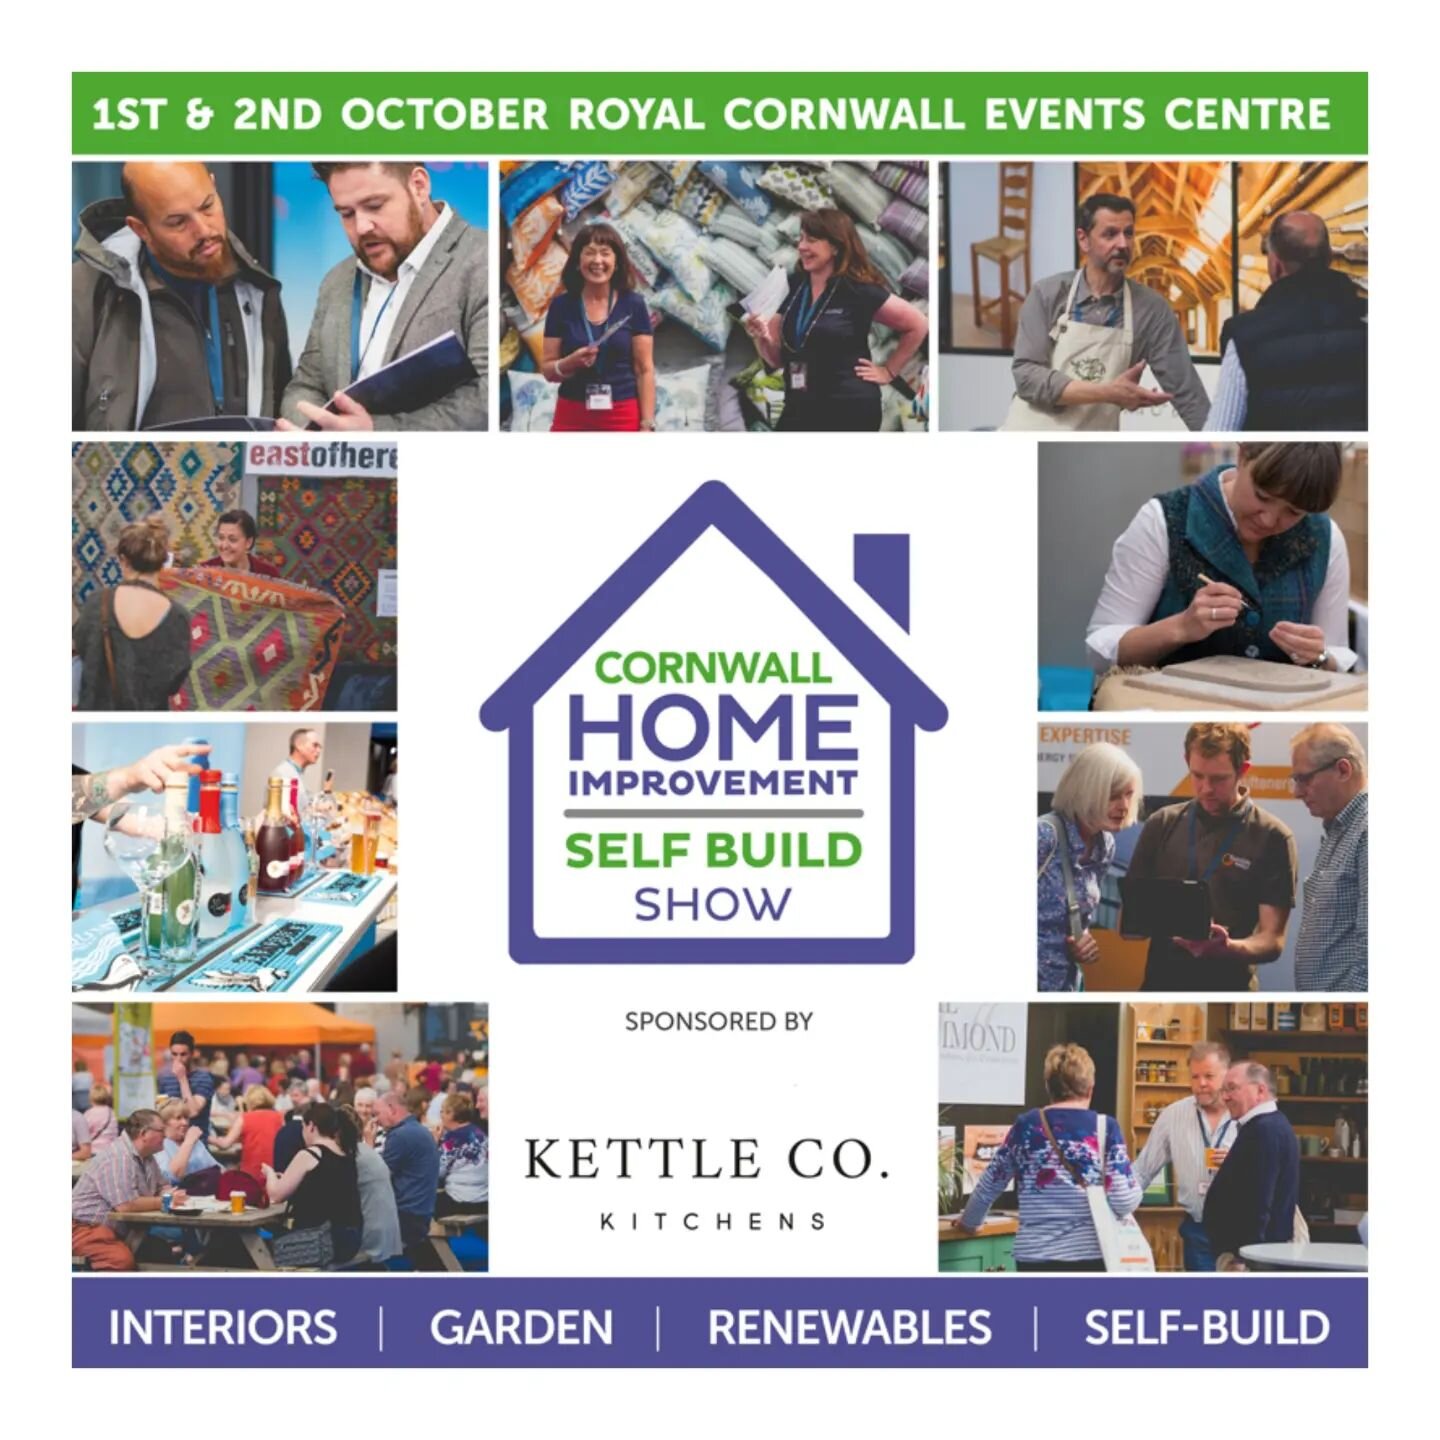 ⚪ CORNWALL SELF BUILD SHOW ⚪

Devon &amp; Cornwall Planning Consultants will be at the @cornwallselfbuildshow on 1st &amp; 2nd October, Stand 26. Come and say hello! We will be next door to @vardoarchitecture

Looking forward to seeing how we can hel